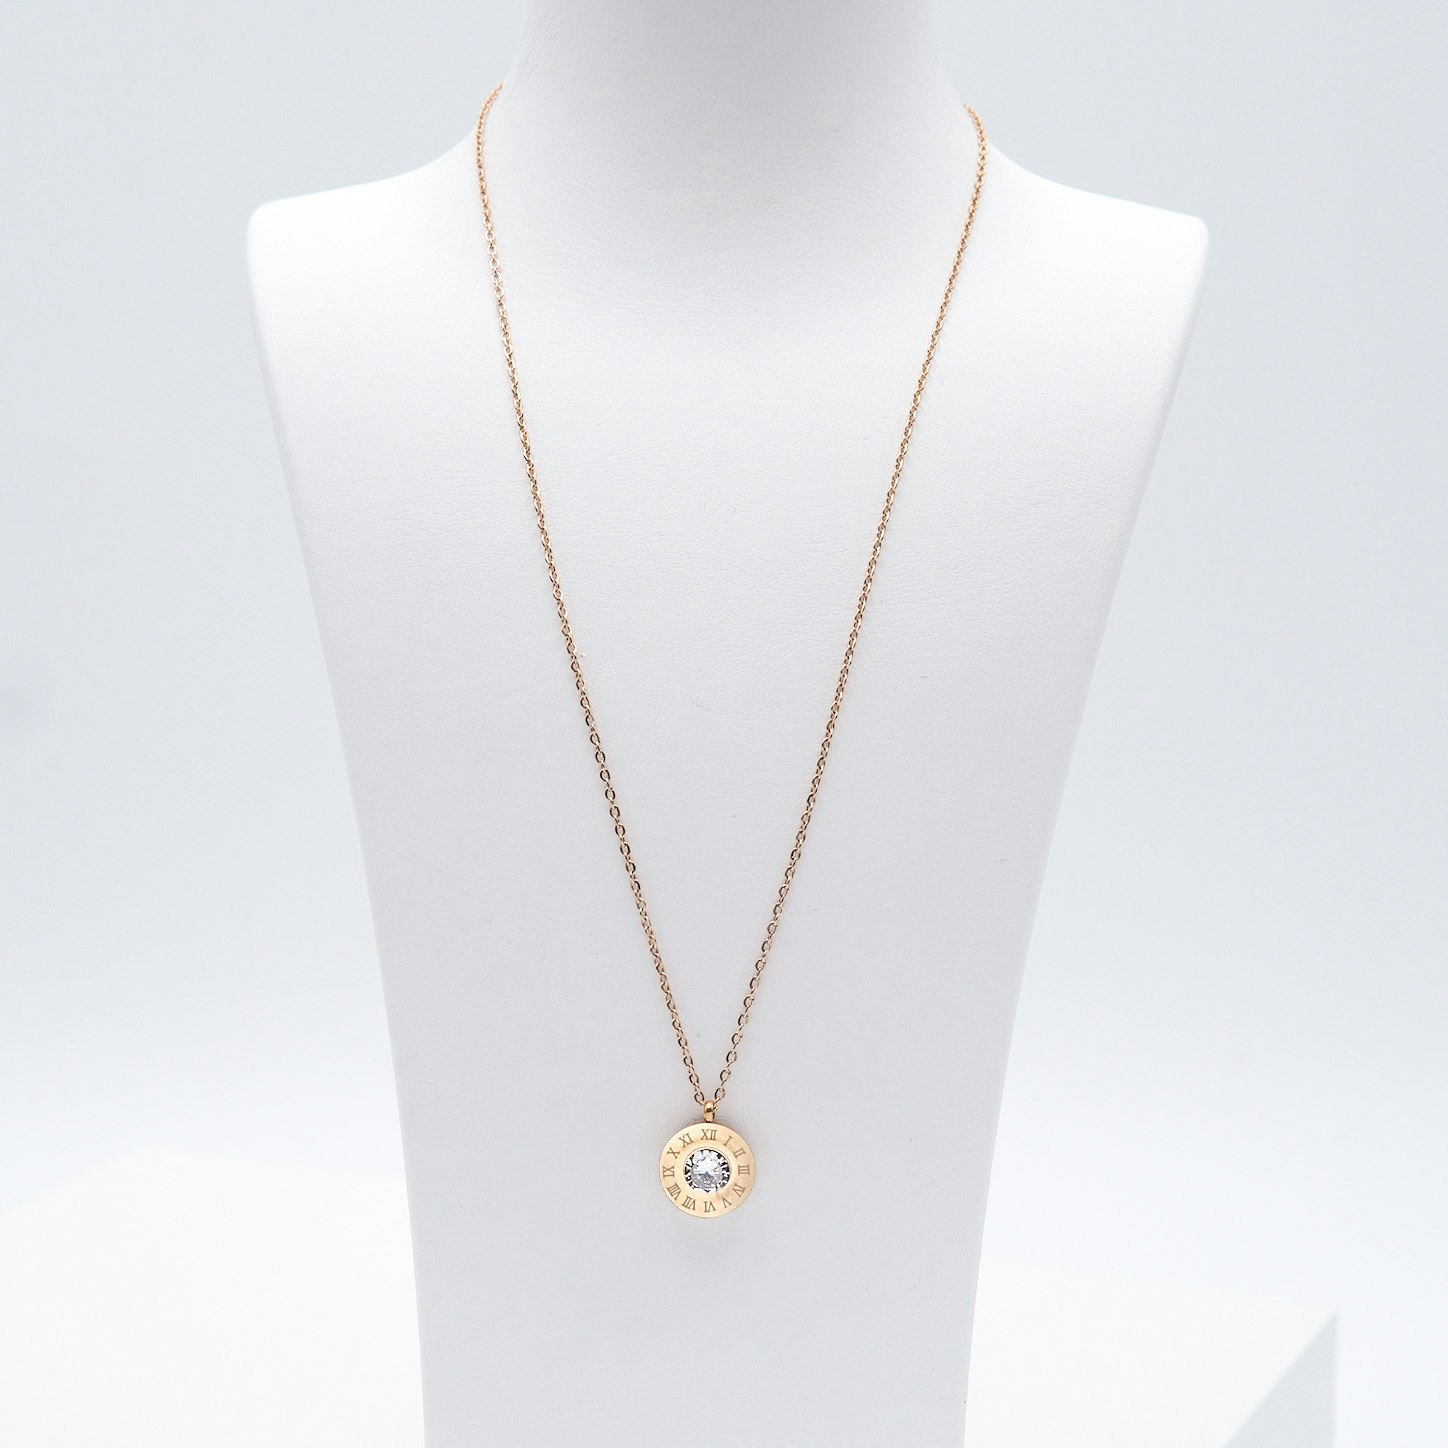 4 Queen Diamonds Necklace Rose Gold Edition Necklace - SWEVALI